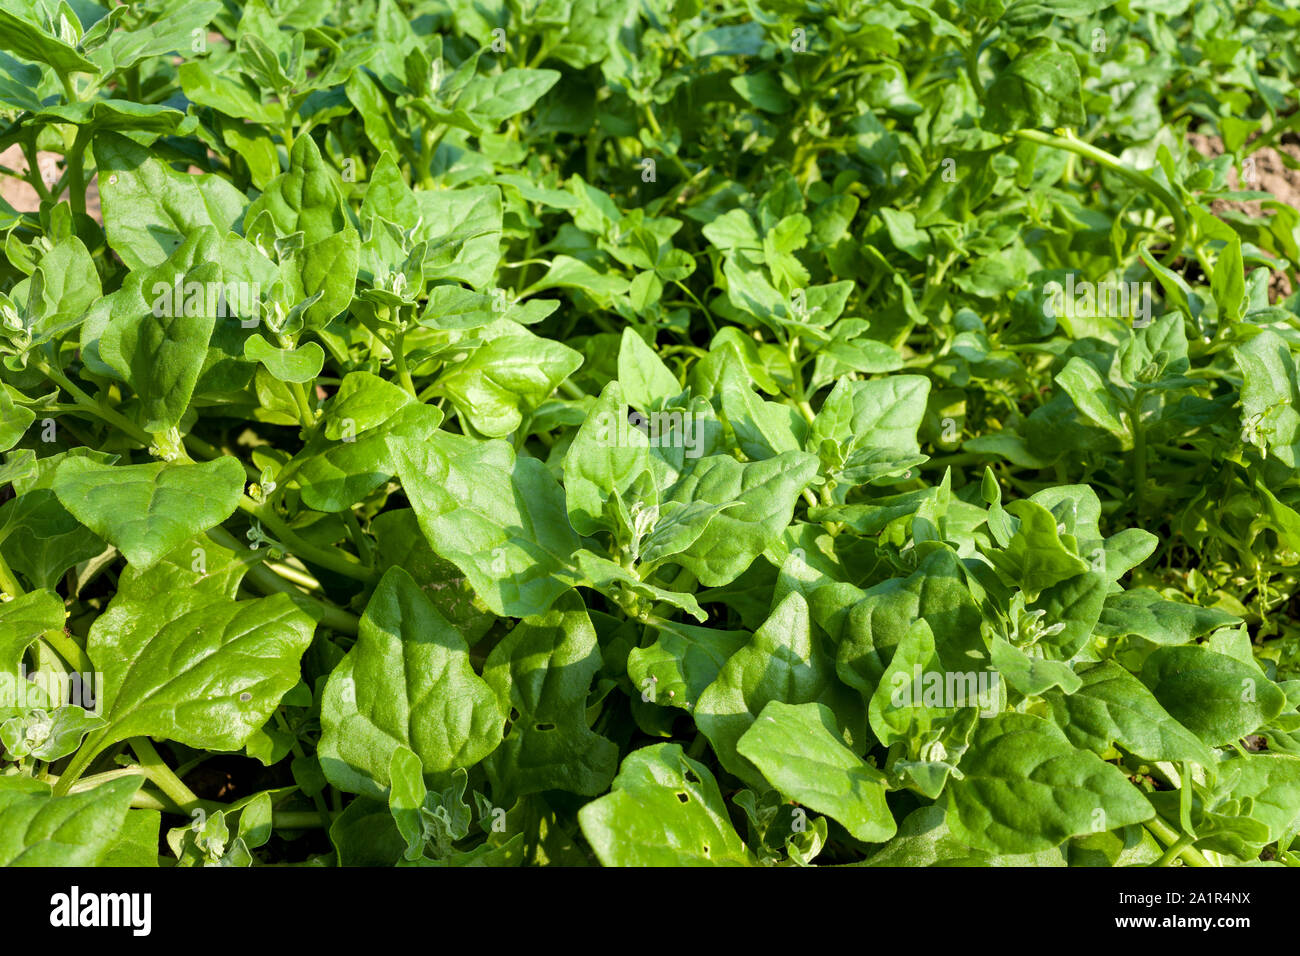 New Zealand spinach in the garden Stock Photo